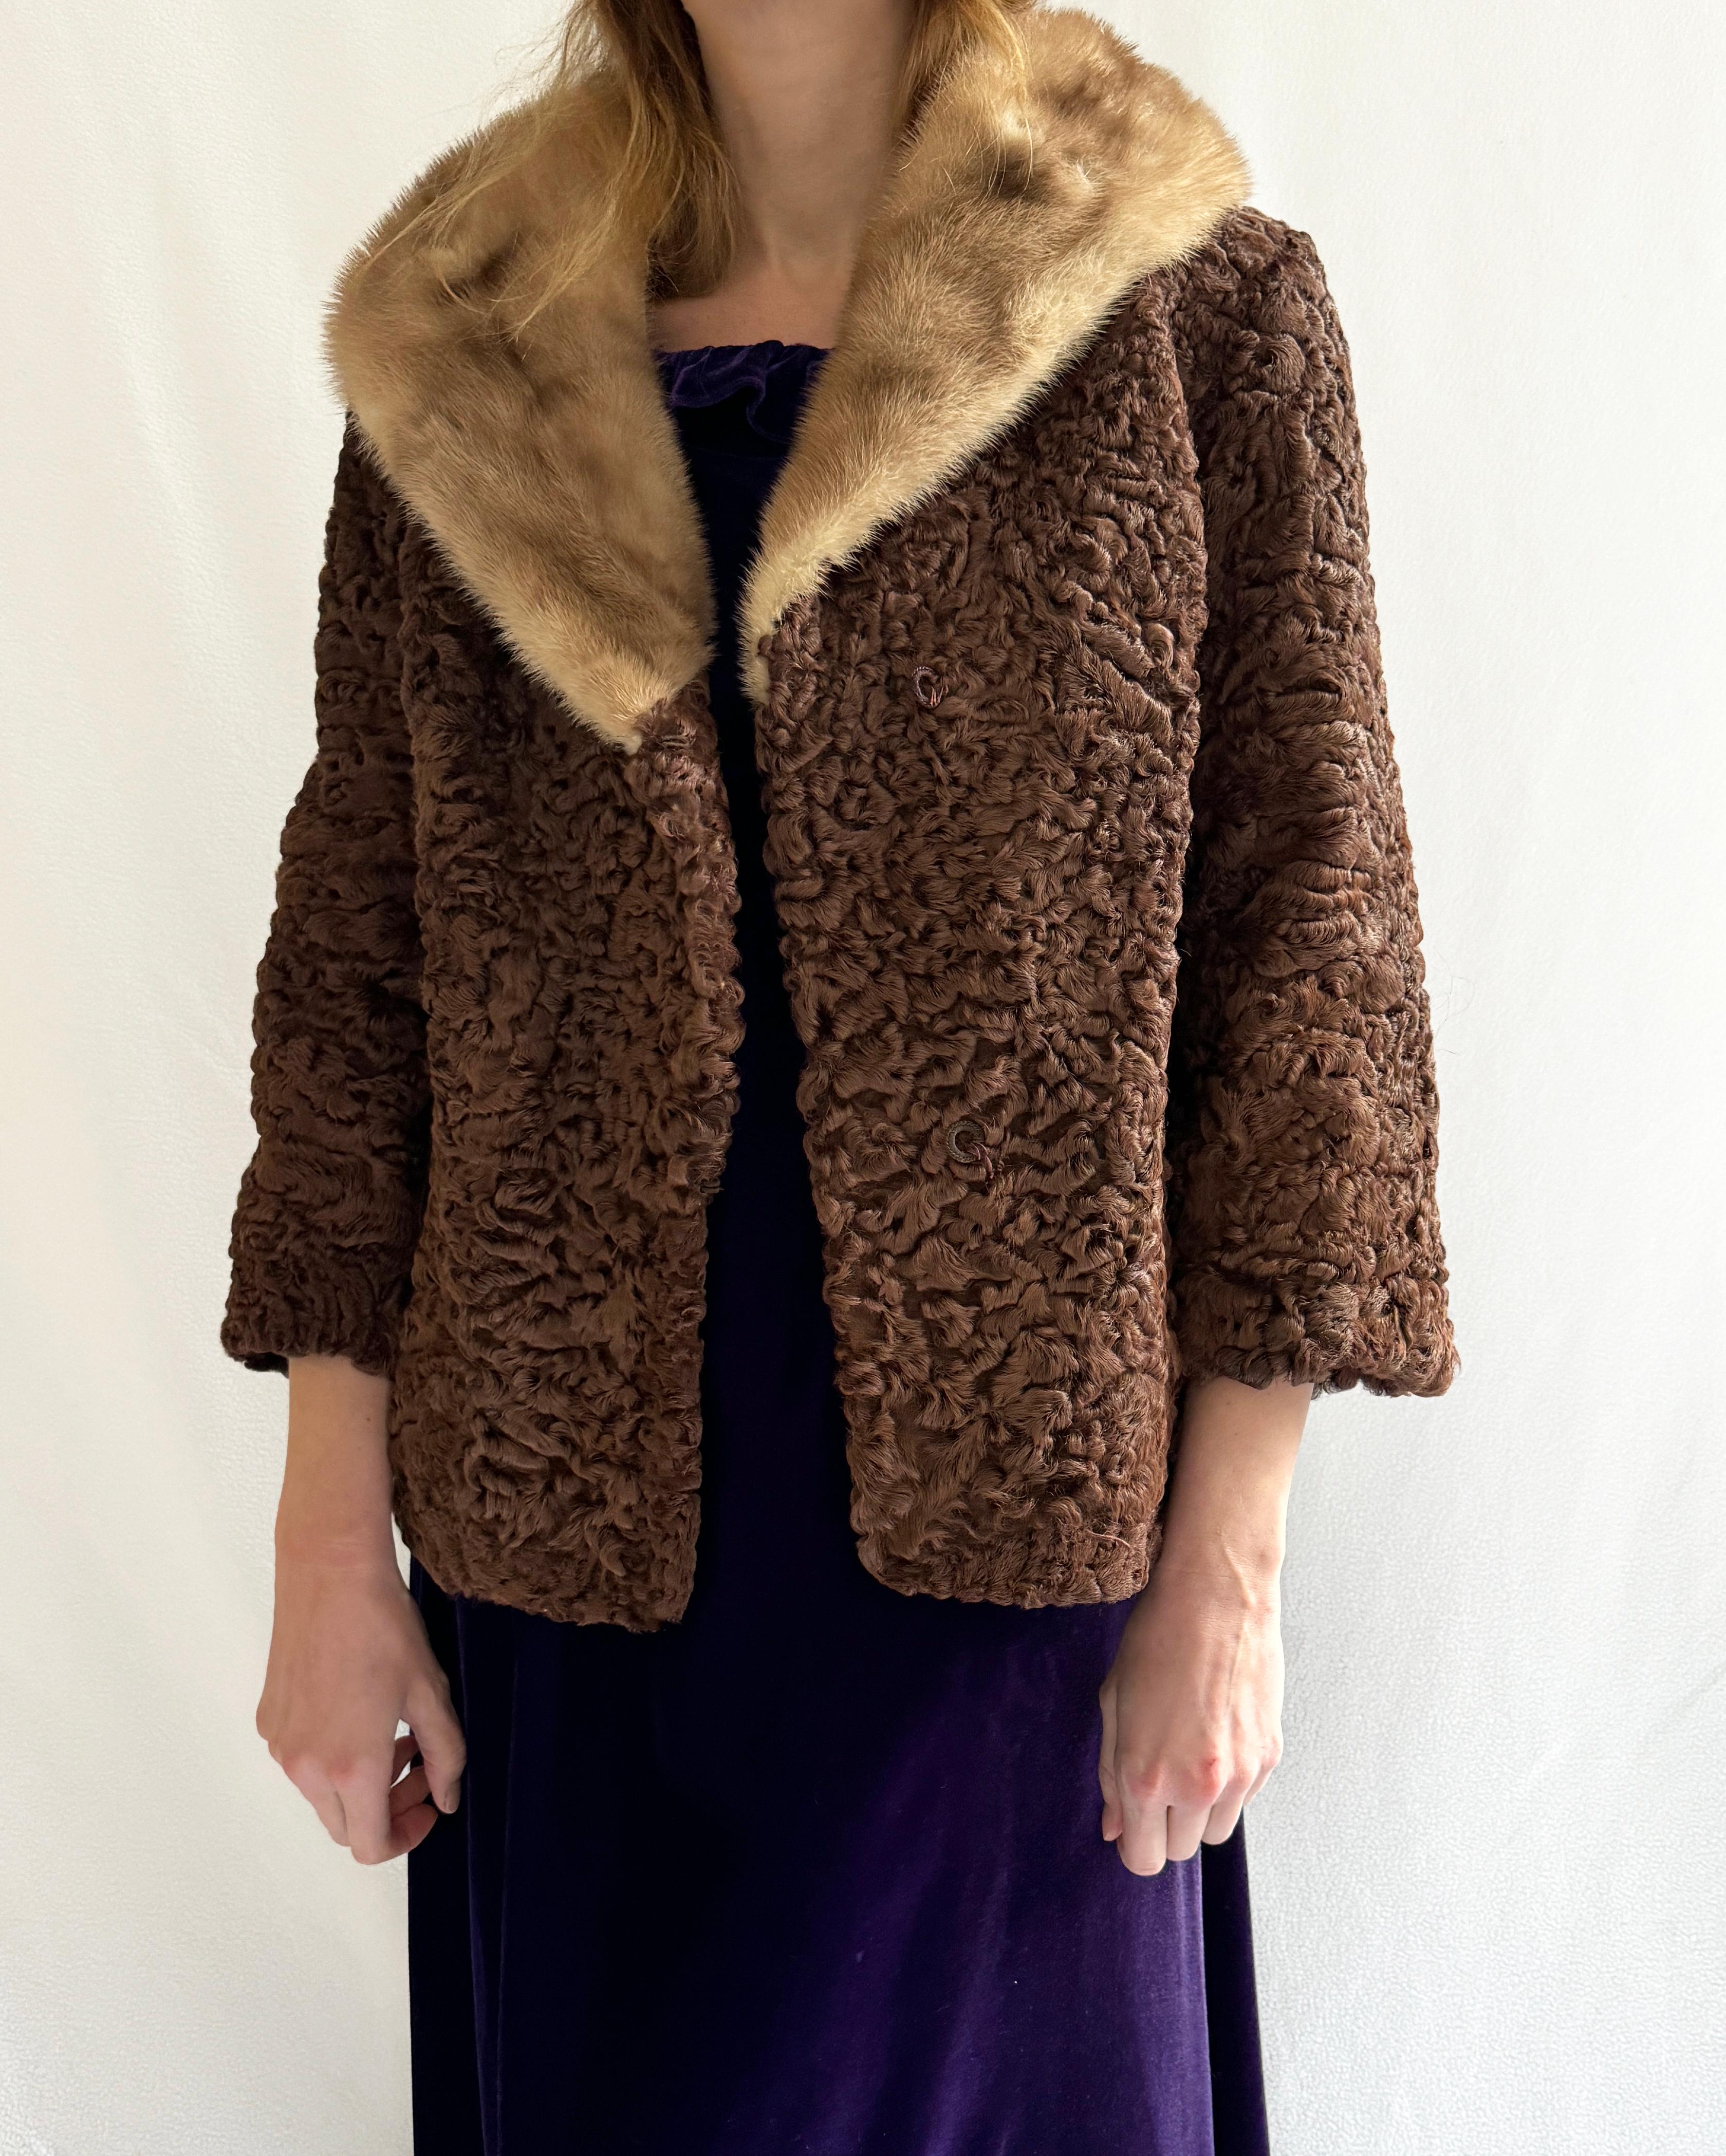 Made in the early 1960s, this vintage Persian lamb (broadtail lamb) coat is the most gorgeous chocolate brown color, with a blonde mink collar. These colors pair well with literally everything, including black. Persian lamb is such a coveted